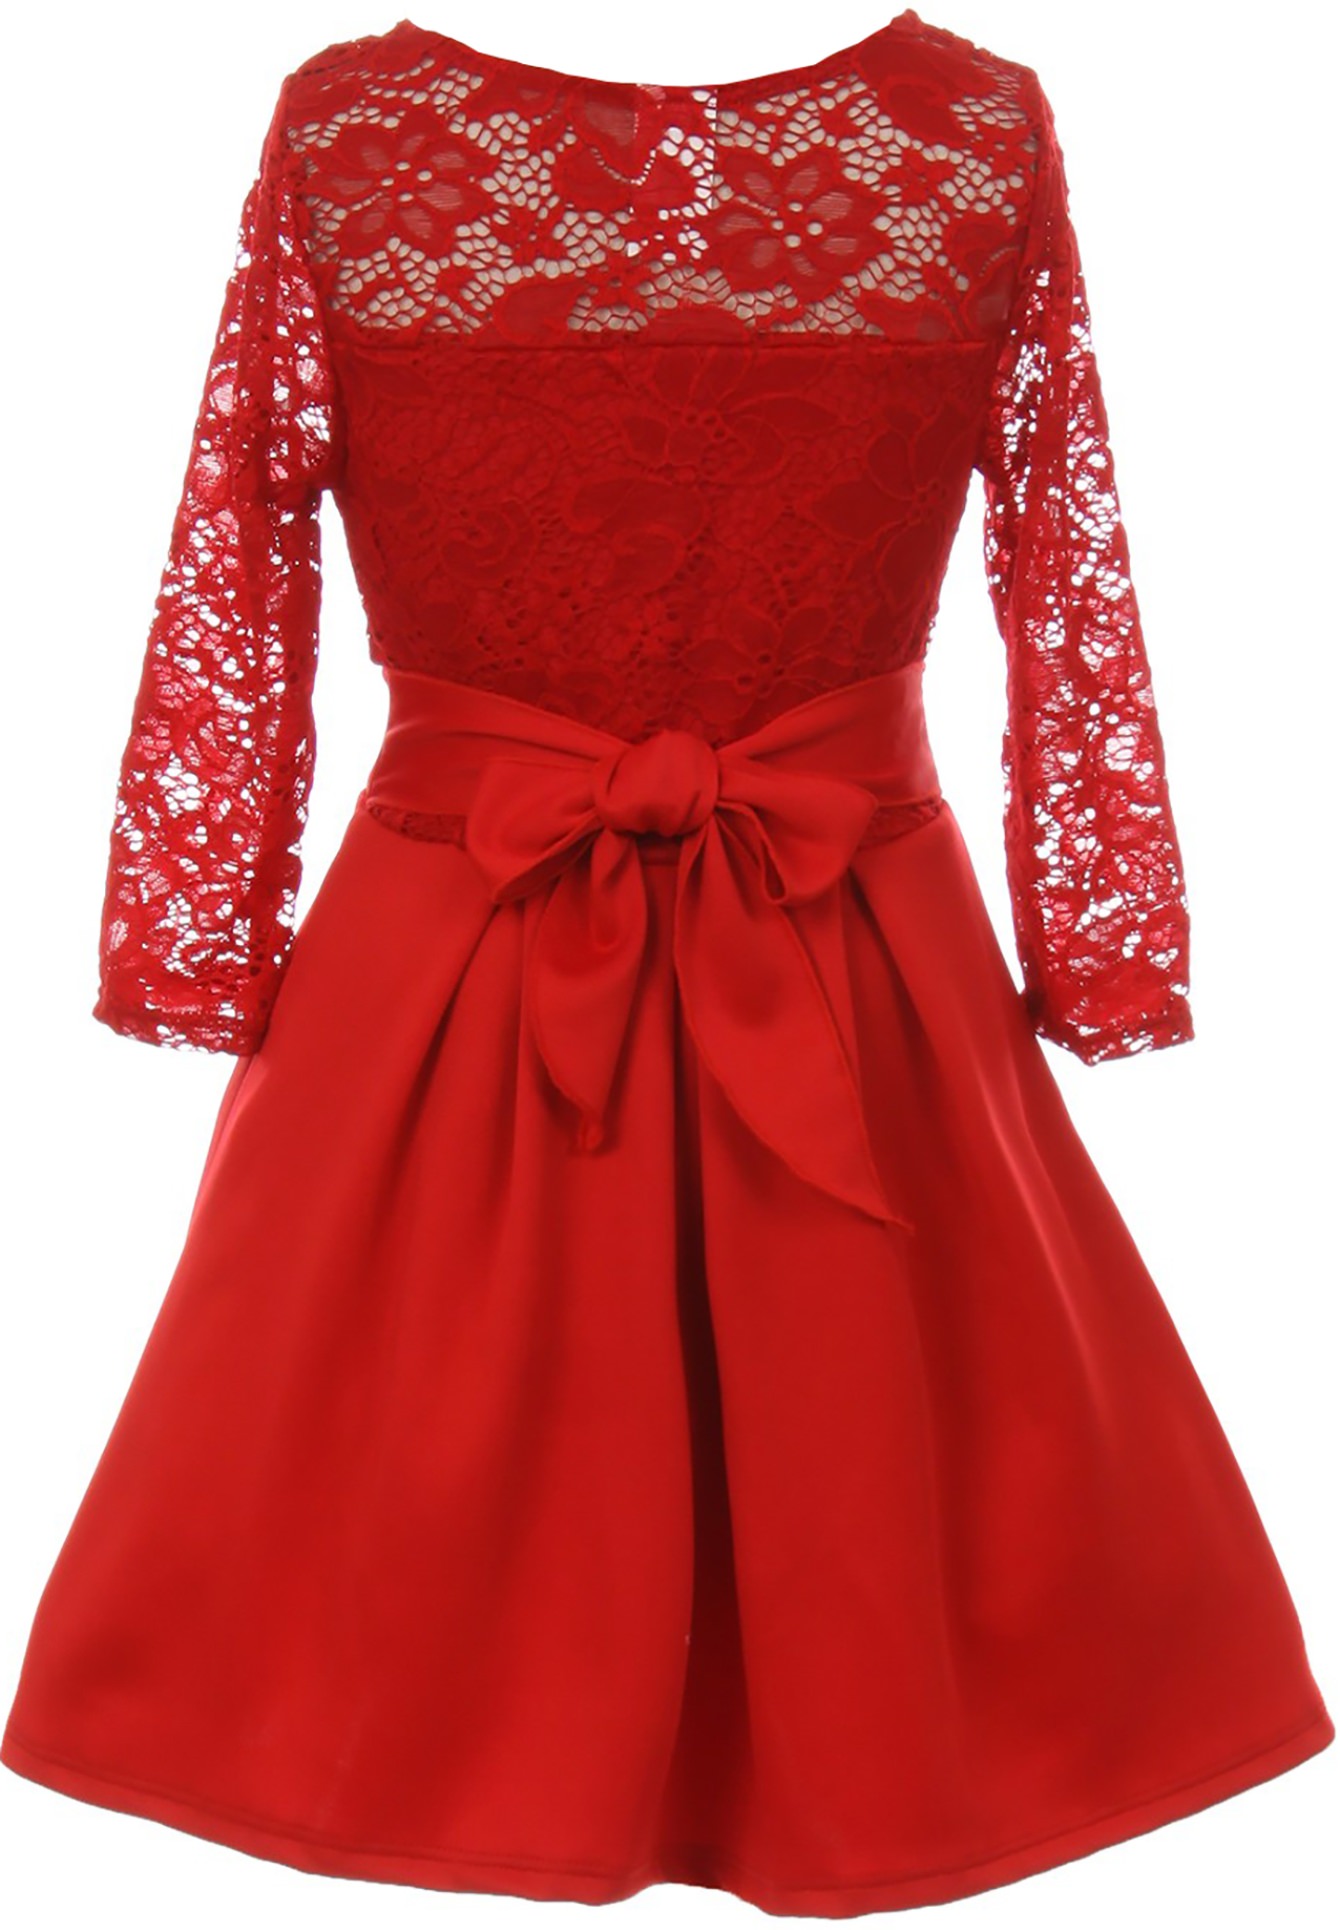 Little Girls Elegant Floral Lace Illusion Top Pearl Necklace Holiday Flower Girl Dress Red 4 (2J1K0S4) - image 3 of 4